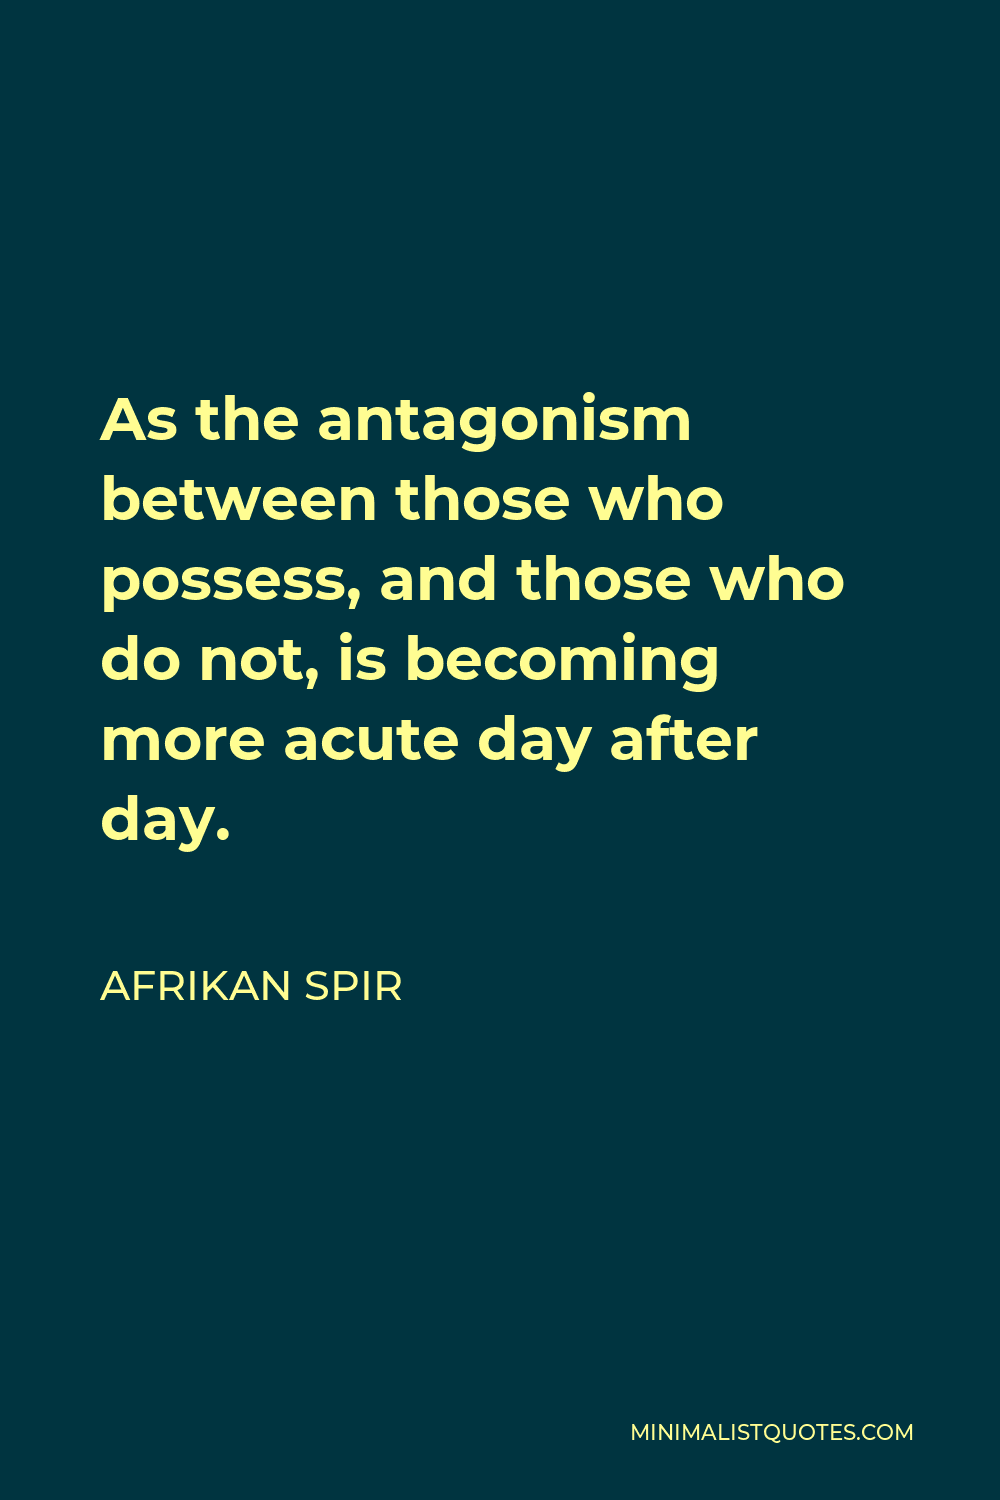 Afrikan Spir Quote - As the antagonism between those who possess, and those who do not, is becoming more acute day after day.